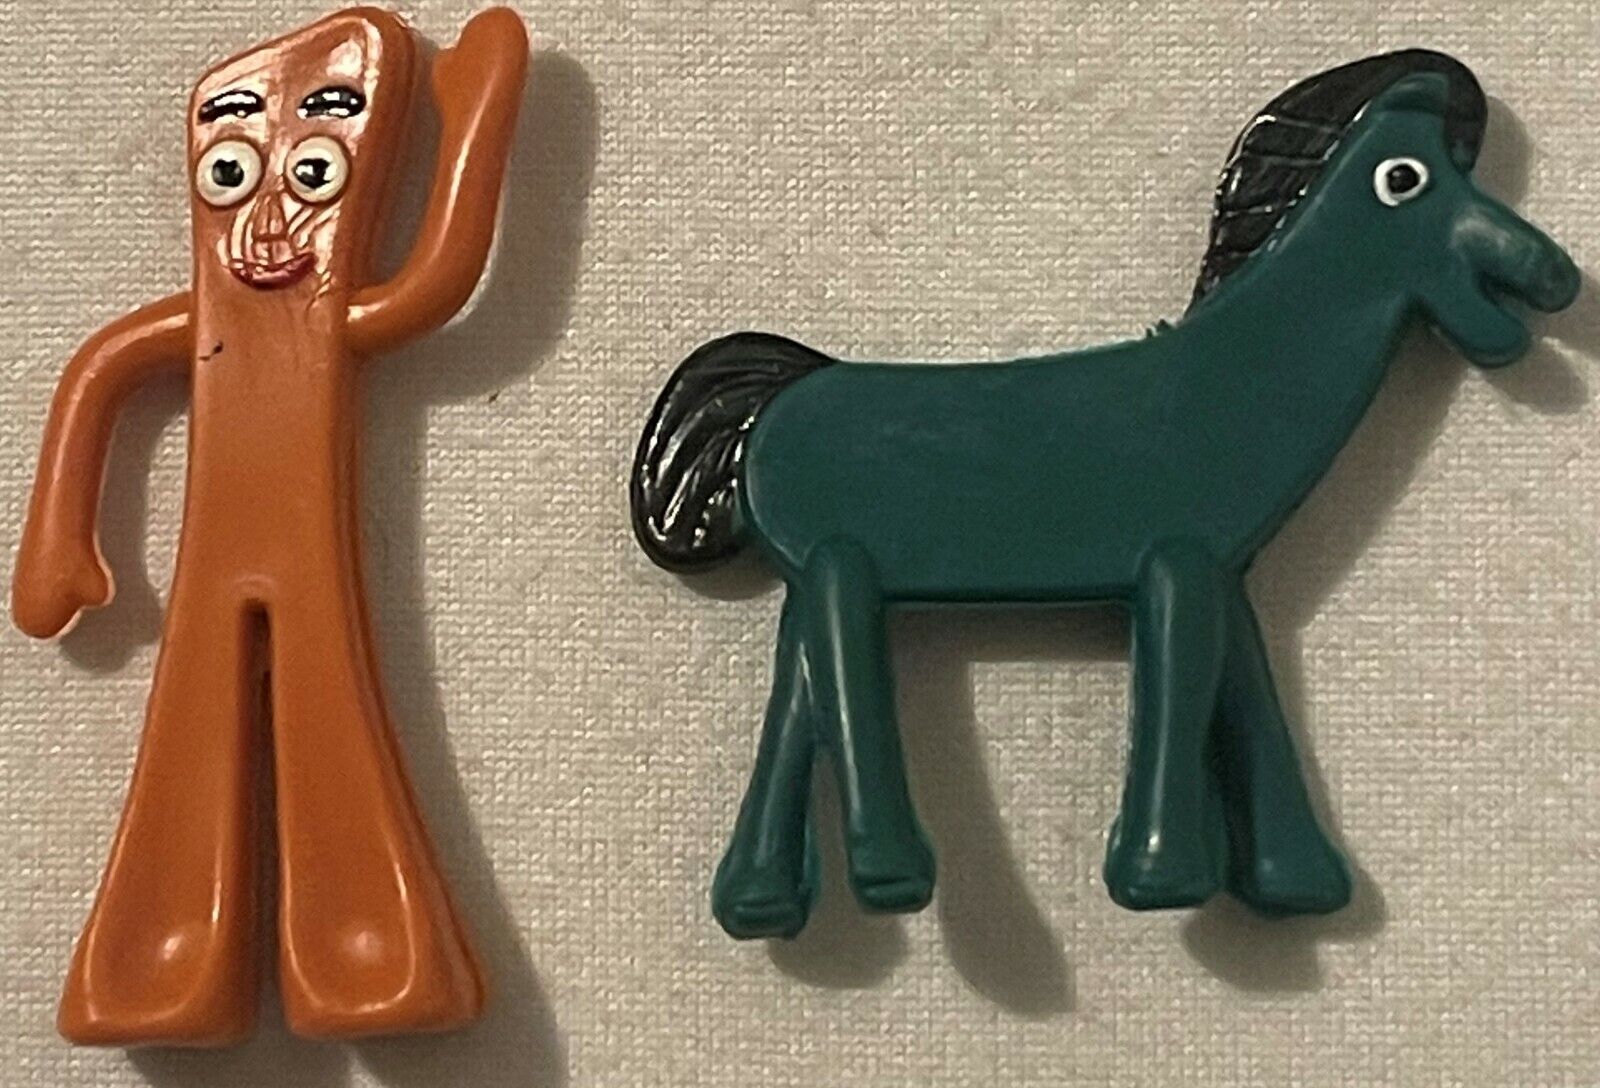 4 Vintage Gumby and Pokey Figurines 1970s 1980s, Both Colors Highly Collectible